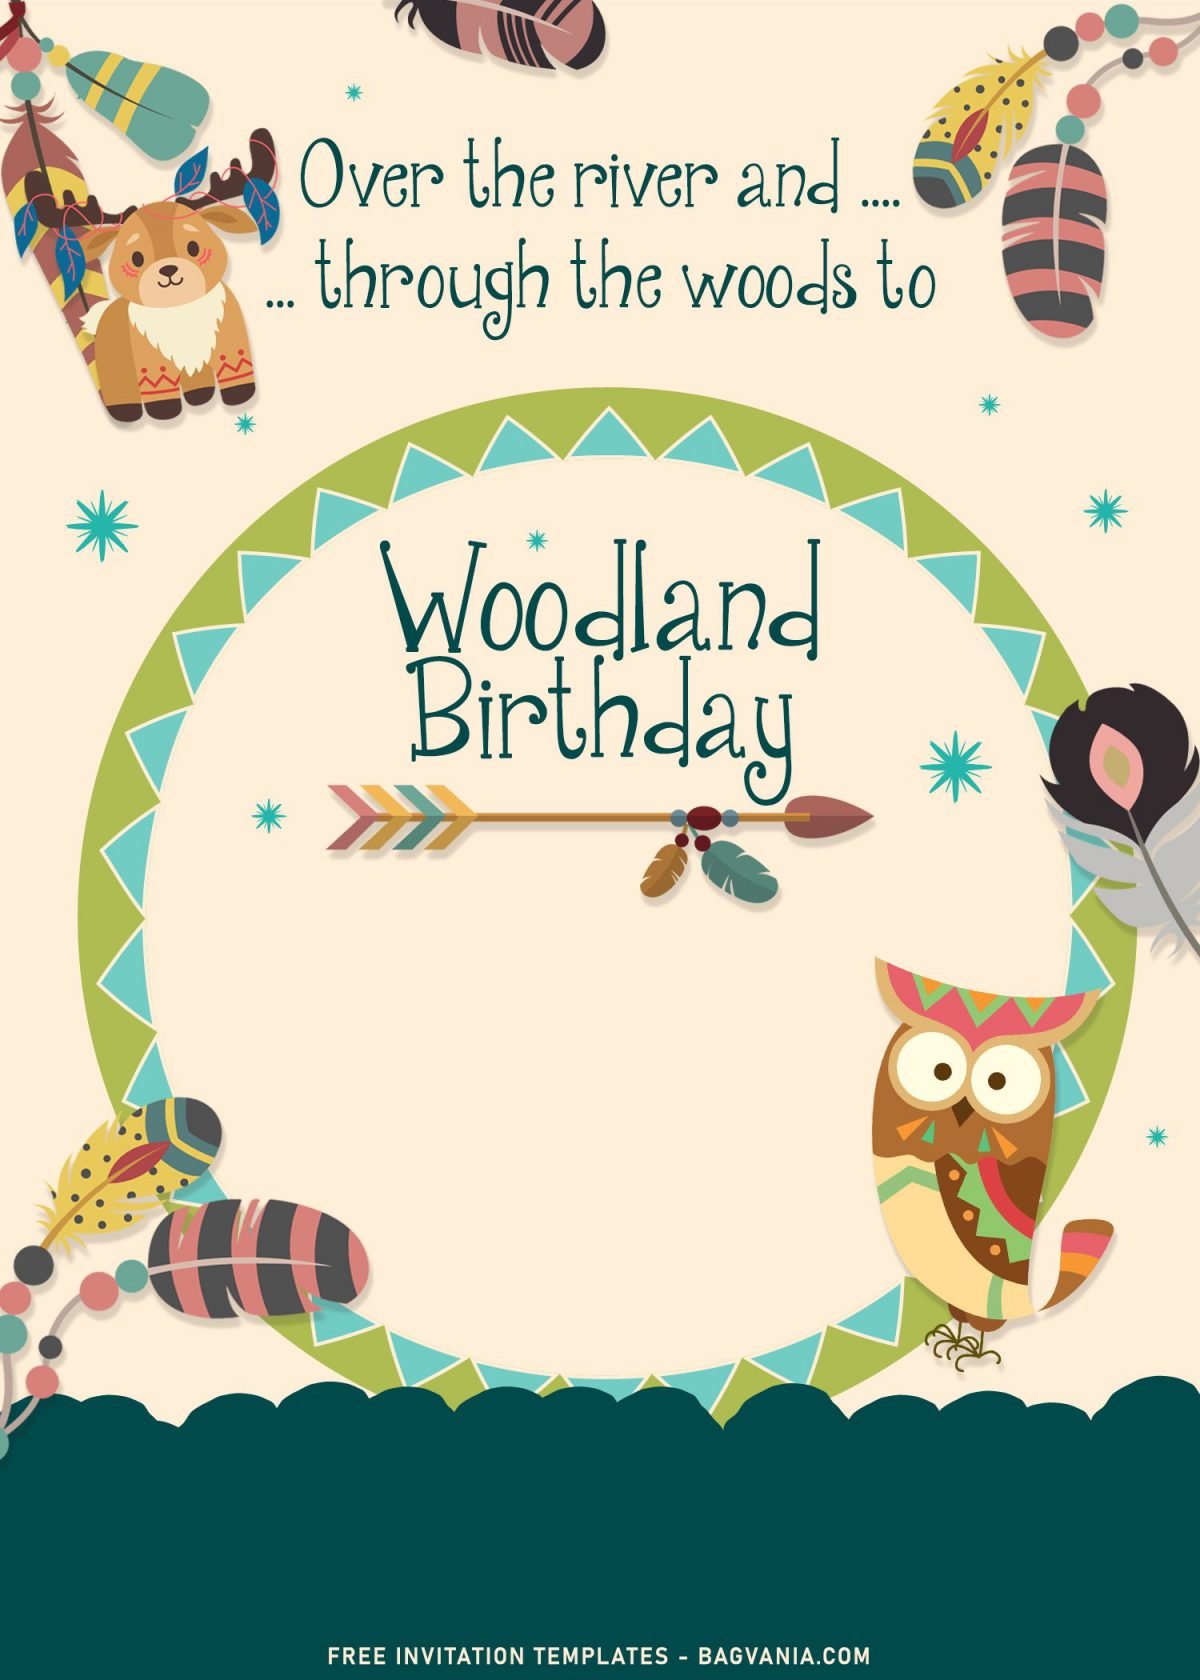 7+ Woodland Birthday Invitation Templates For Your Little Animal Lover Birthday and has cute boho feather